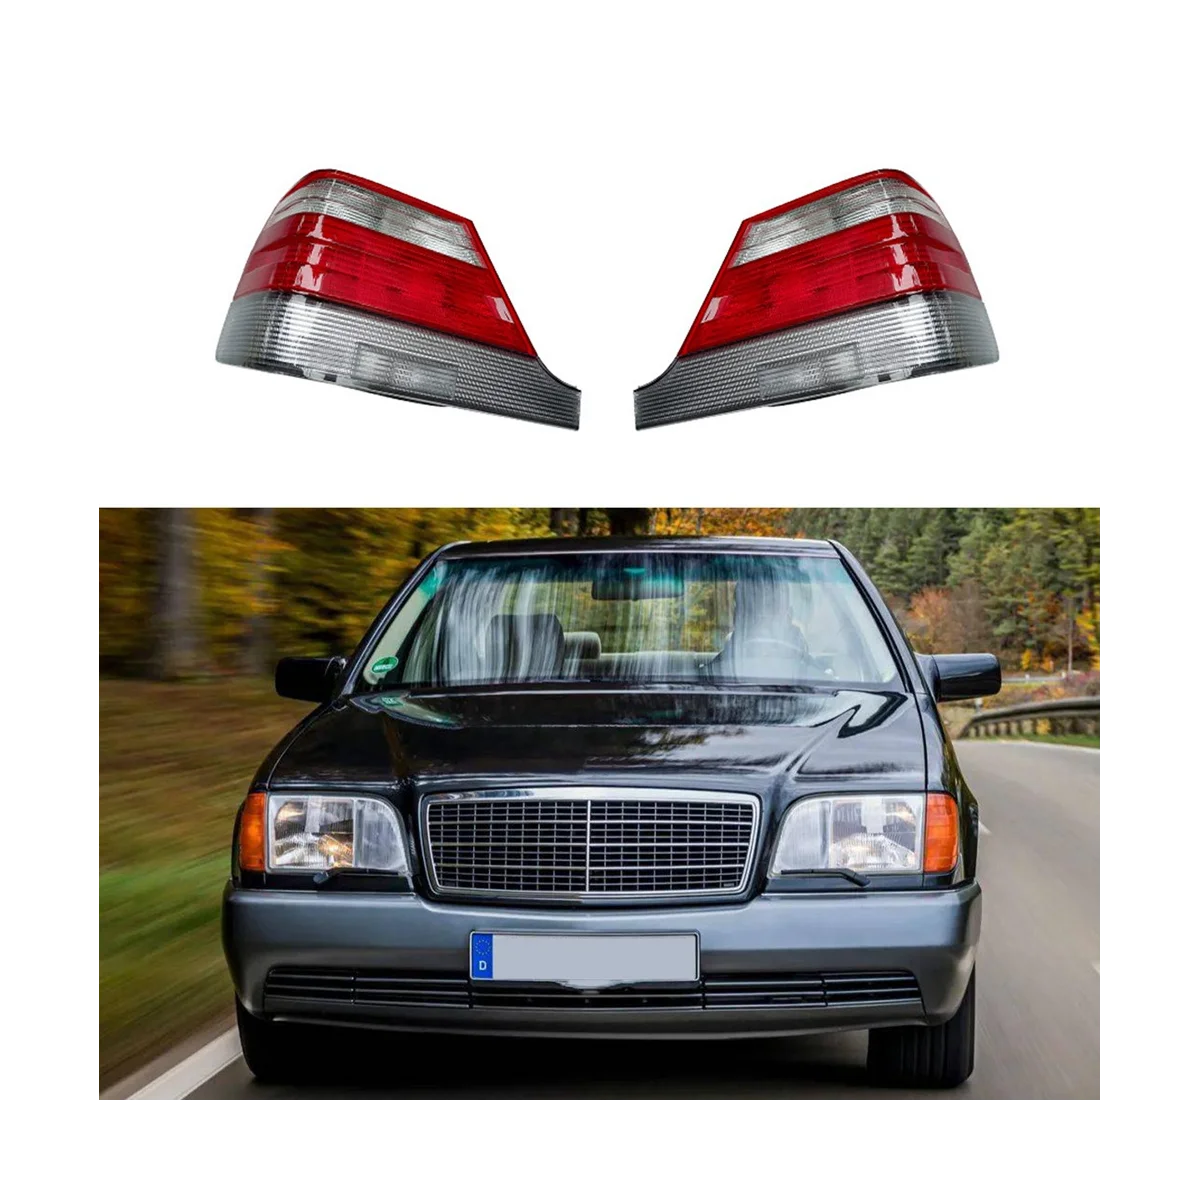 

Car Rear Tail Left Outer Light Lamp Fits for MERCEDES-BENZ S-Class W140 1996-1998 A1408207164